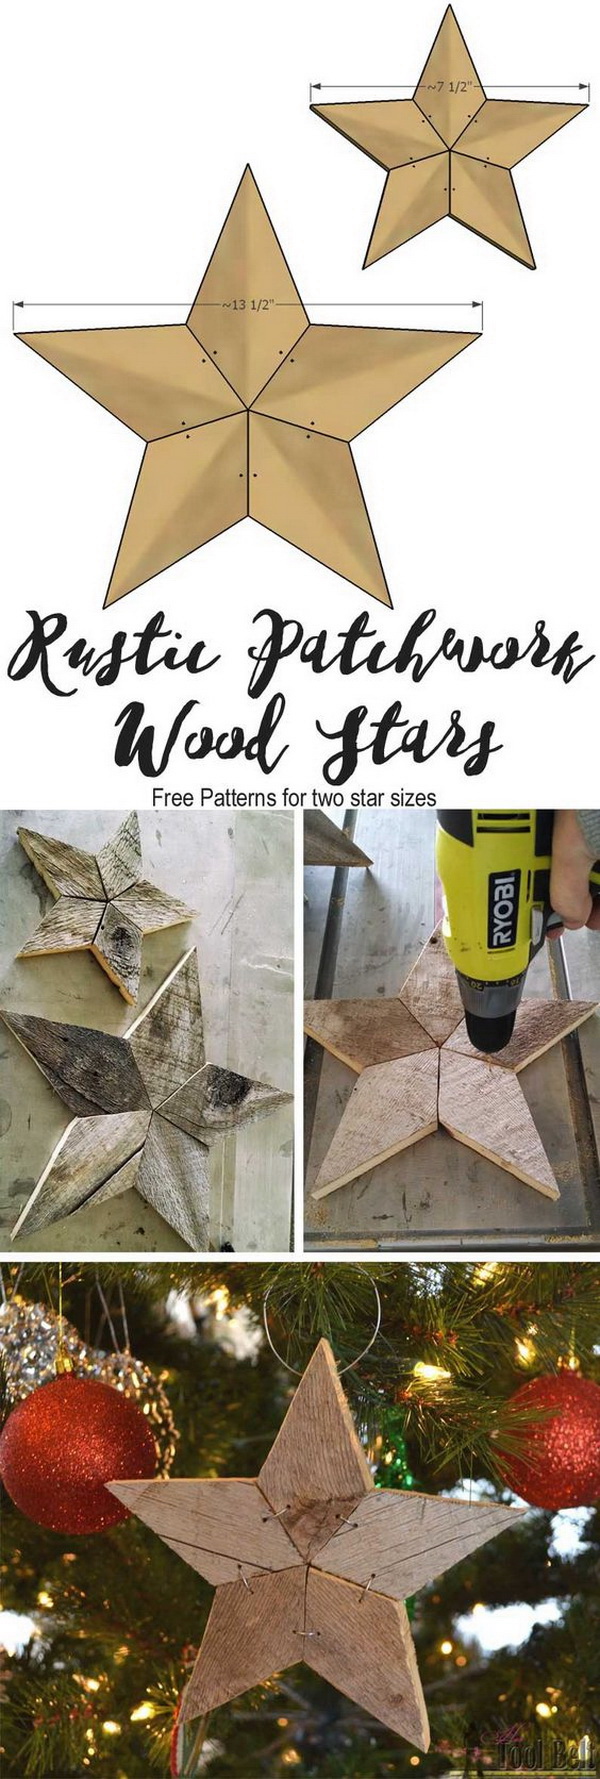 Rustic Patchwork Wood Star Ornaments. Make these fun rustic patchwork stars out of barn wood and add some natural elements into your Christmas decor.